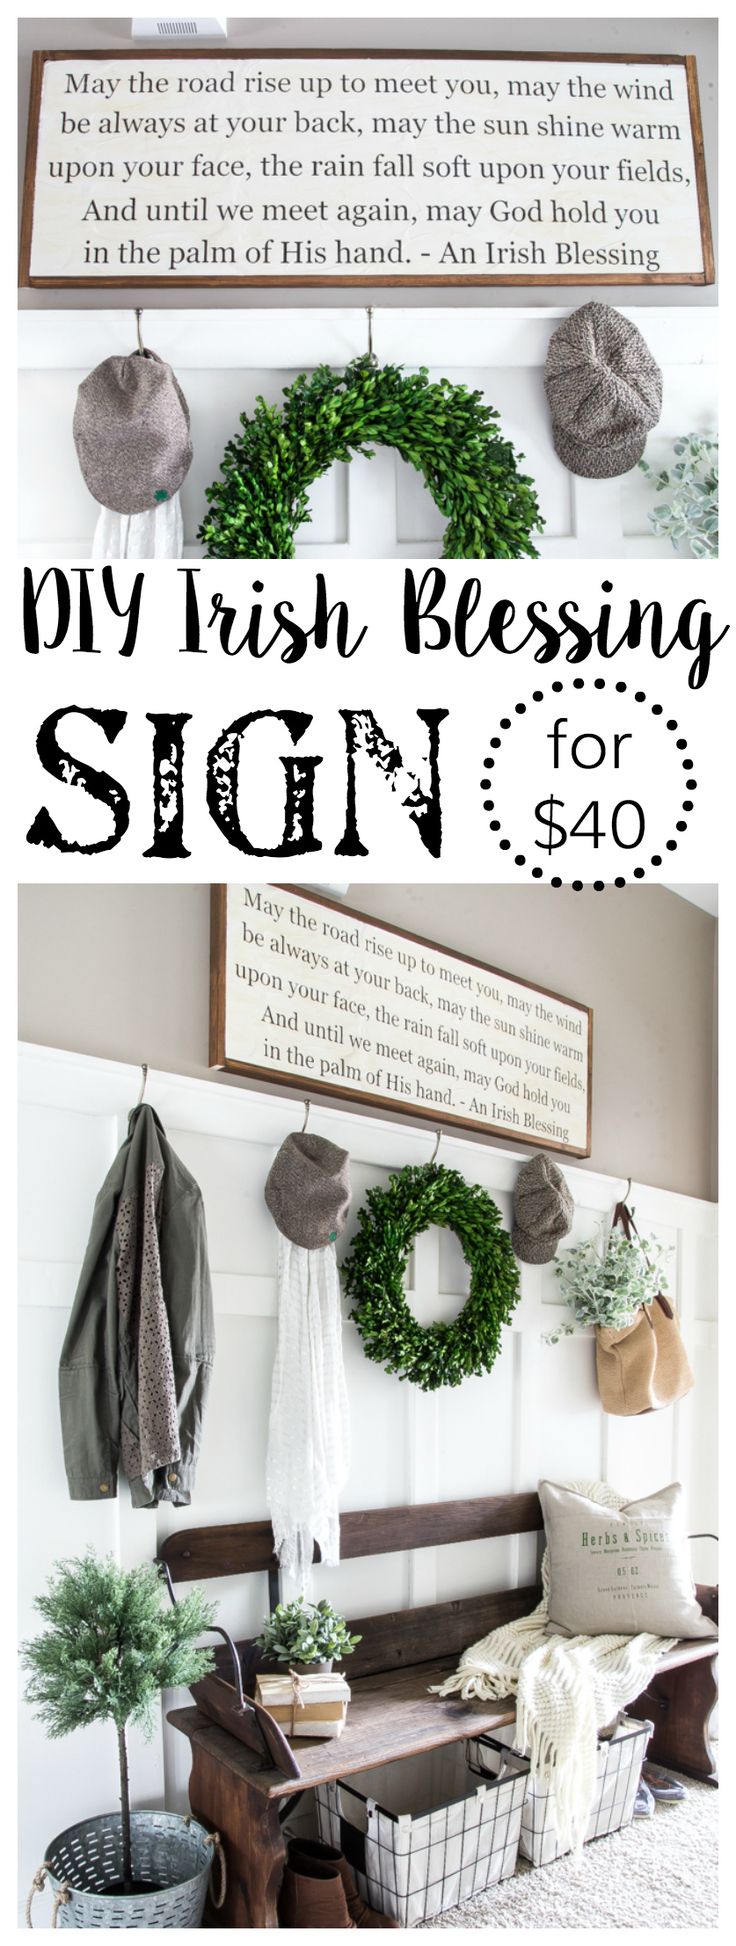 DIY Irish Blessing Sign and Entryway | blesserhouse.com - This is so cute! These...